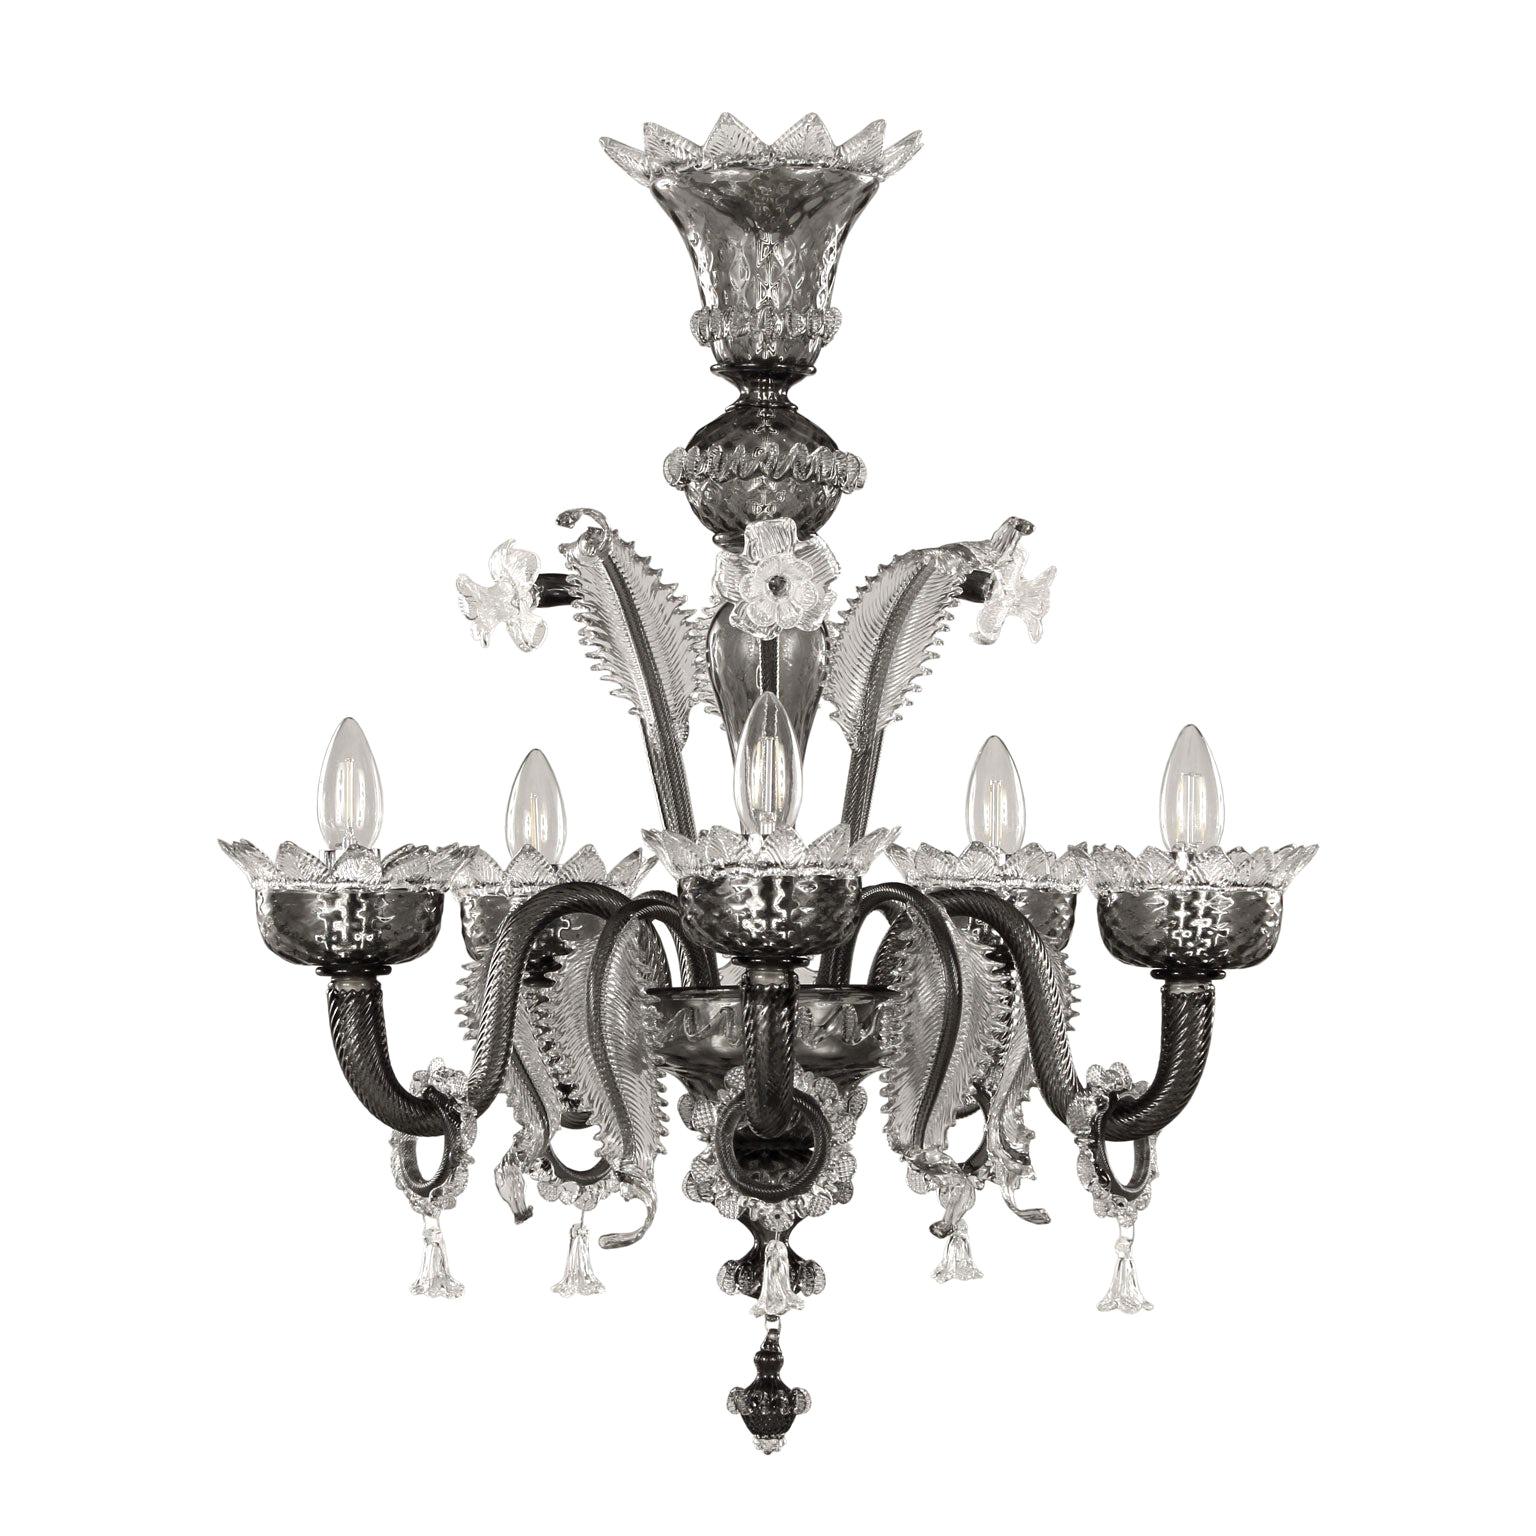 Venetian style Chandelier 5 arms Grey Murano Glass Clear Details by Multiforme For Sale